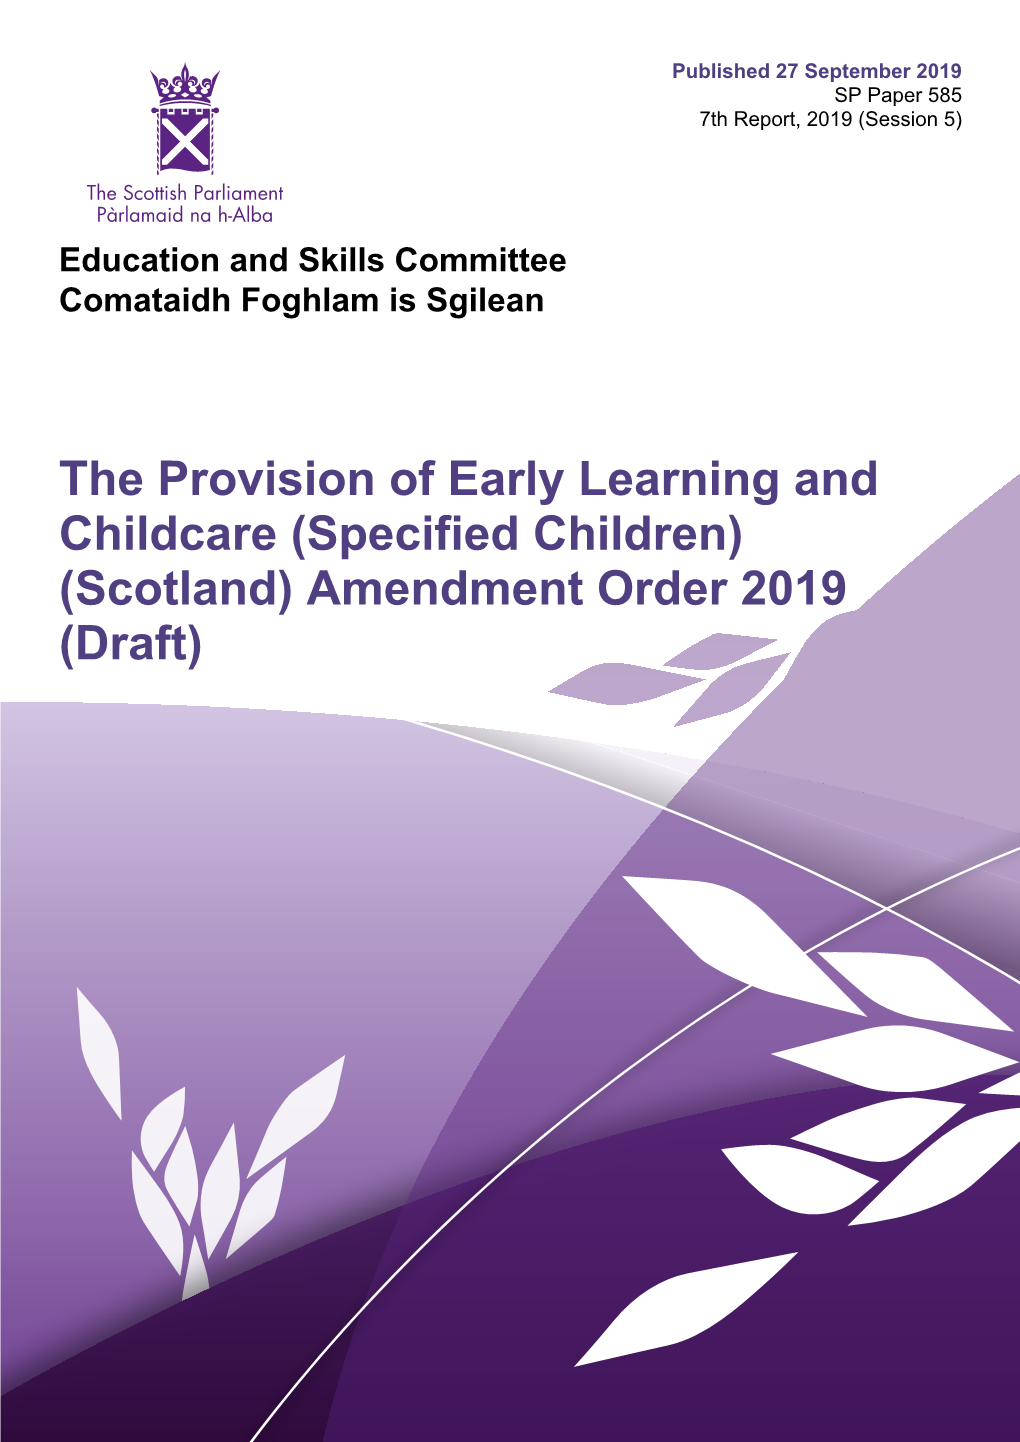 The Provision of Early Learning and Childcare (Specified Children